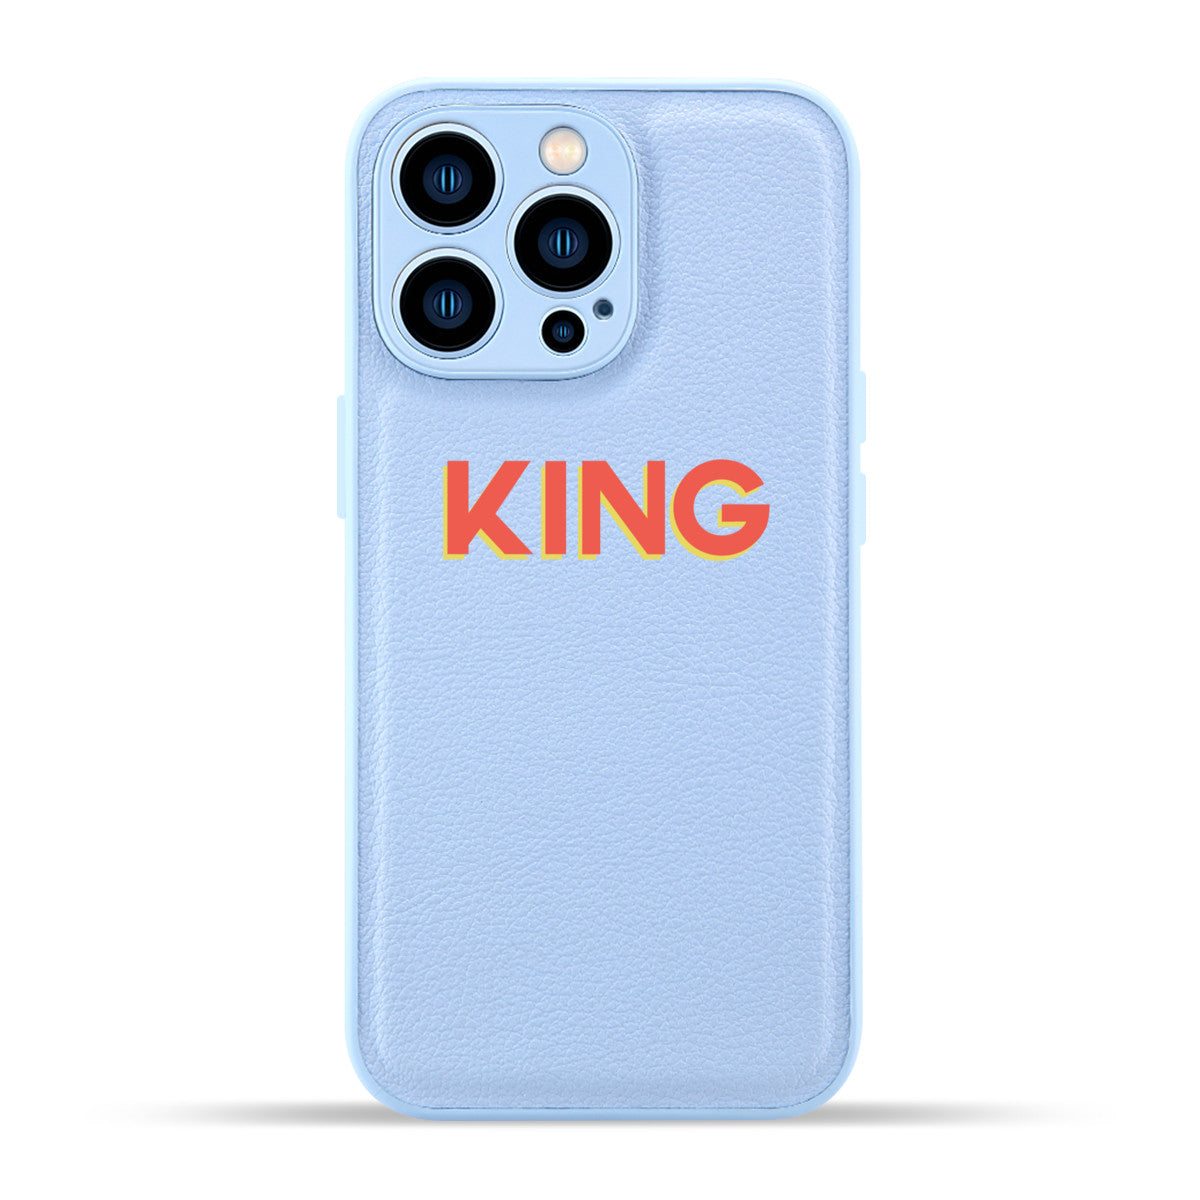 KING - iPhone Case